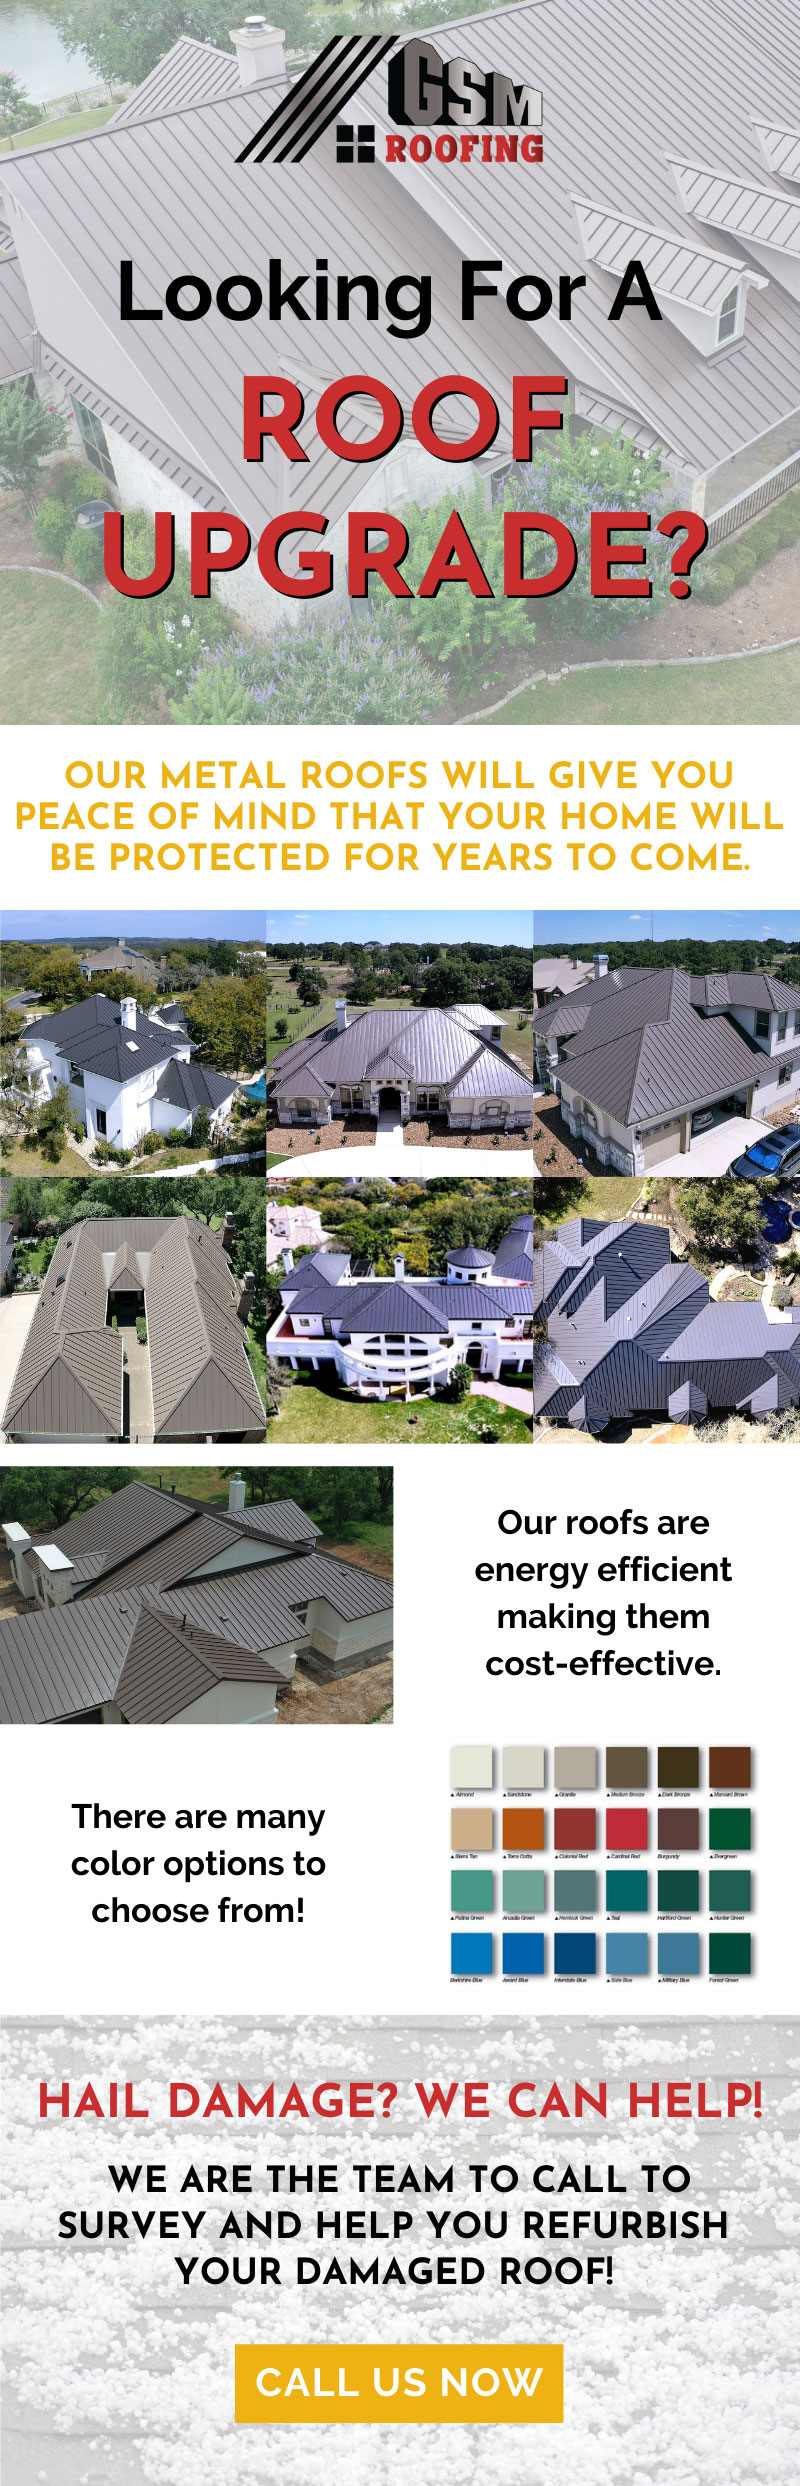 roof upgrade infographic